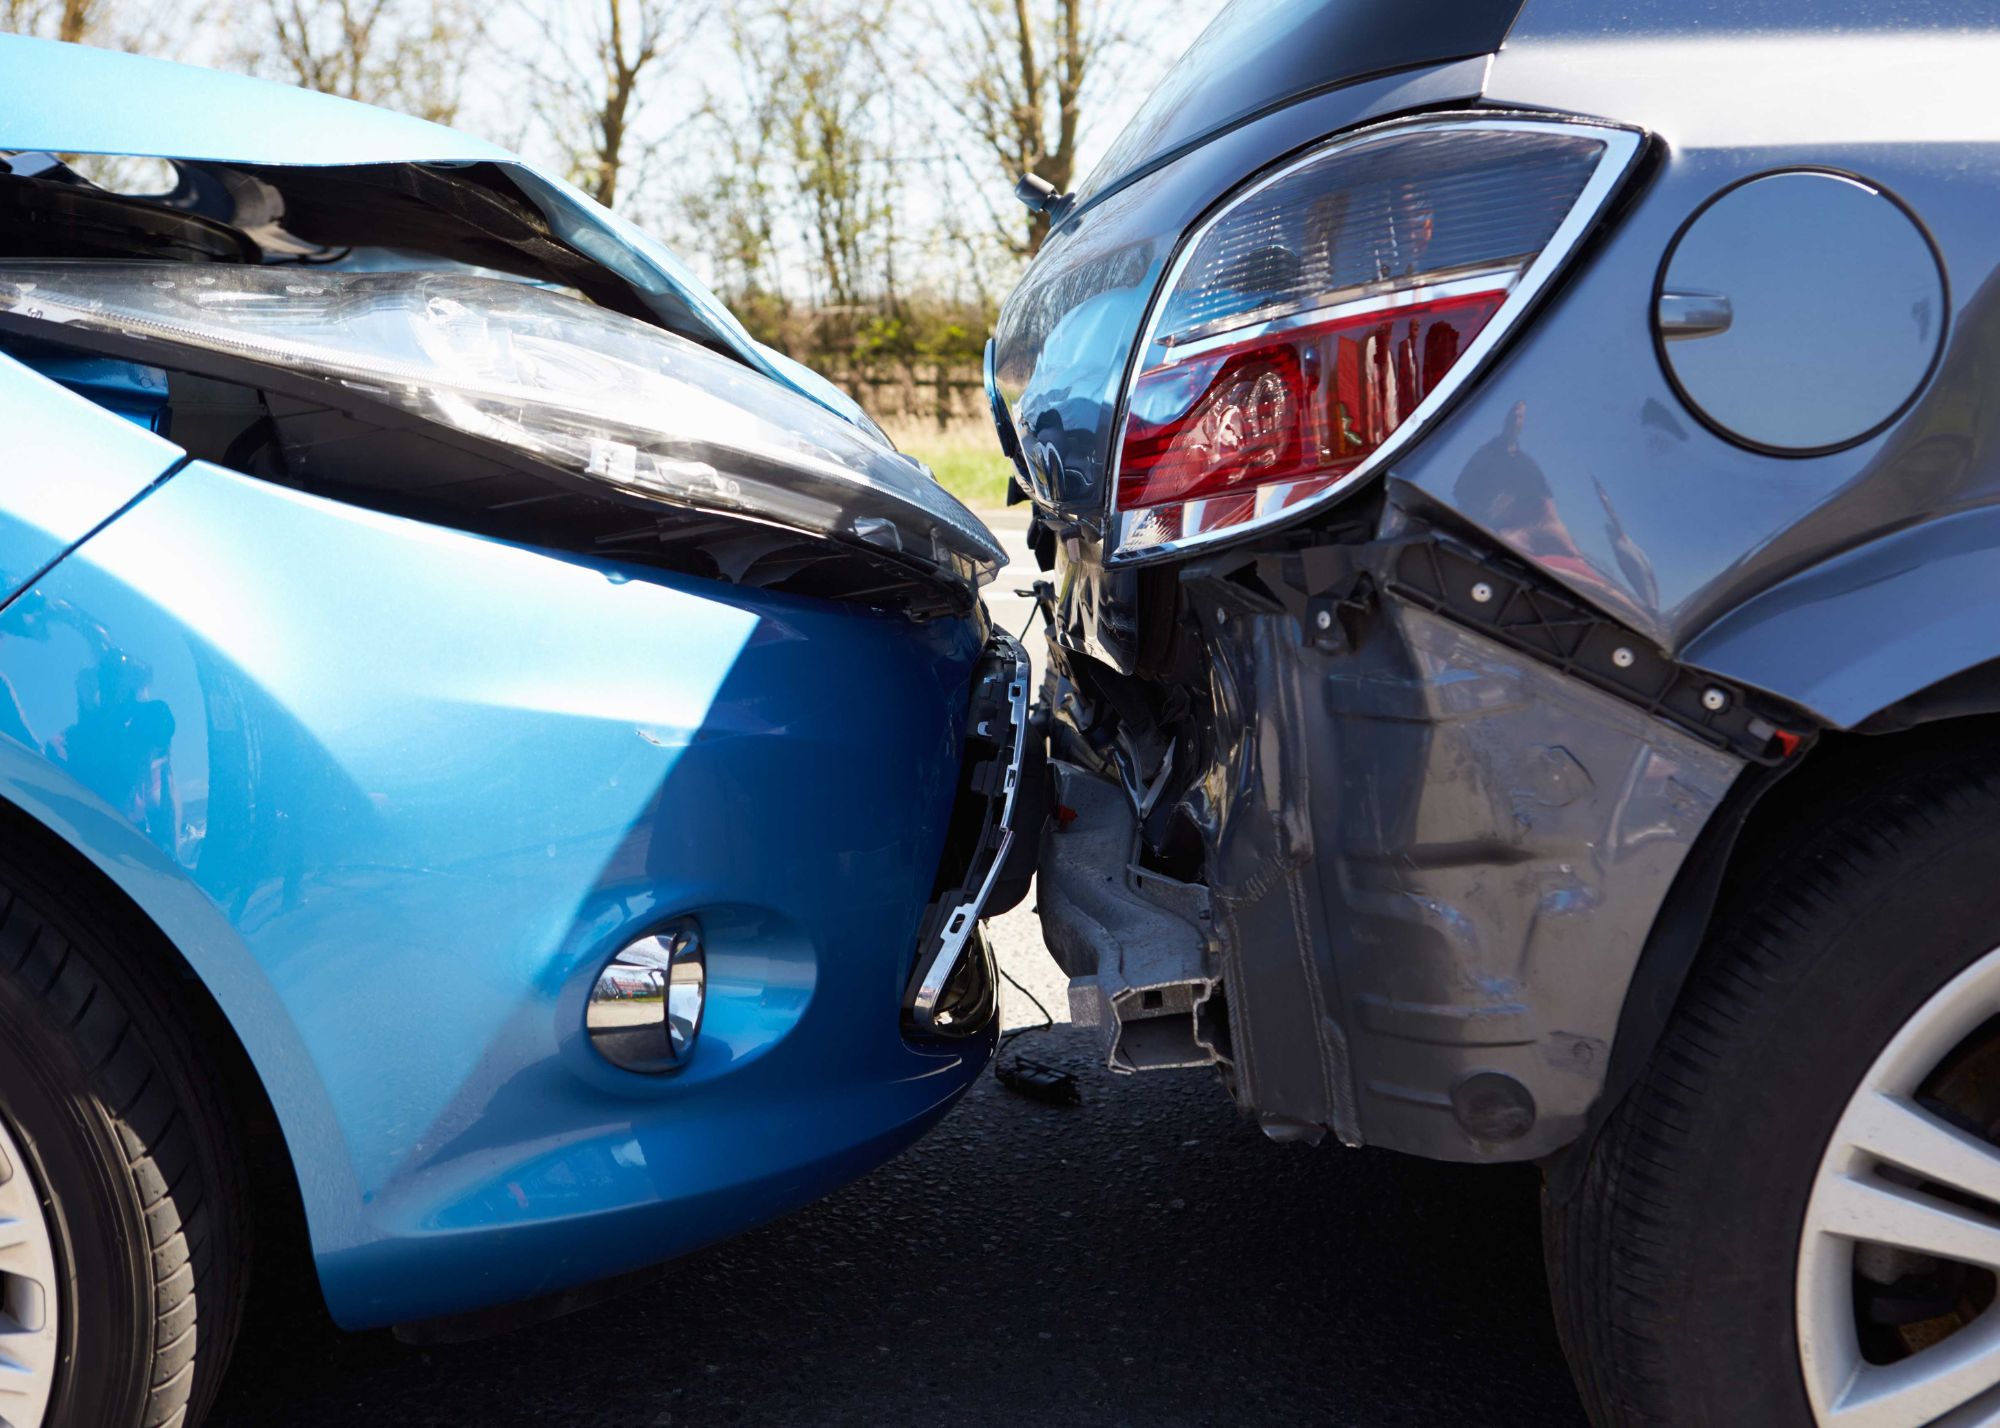 Understanding just what is SR22 Car Accident Insurance options for Sacramento residents